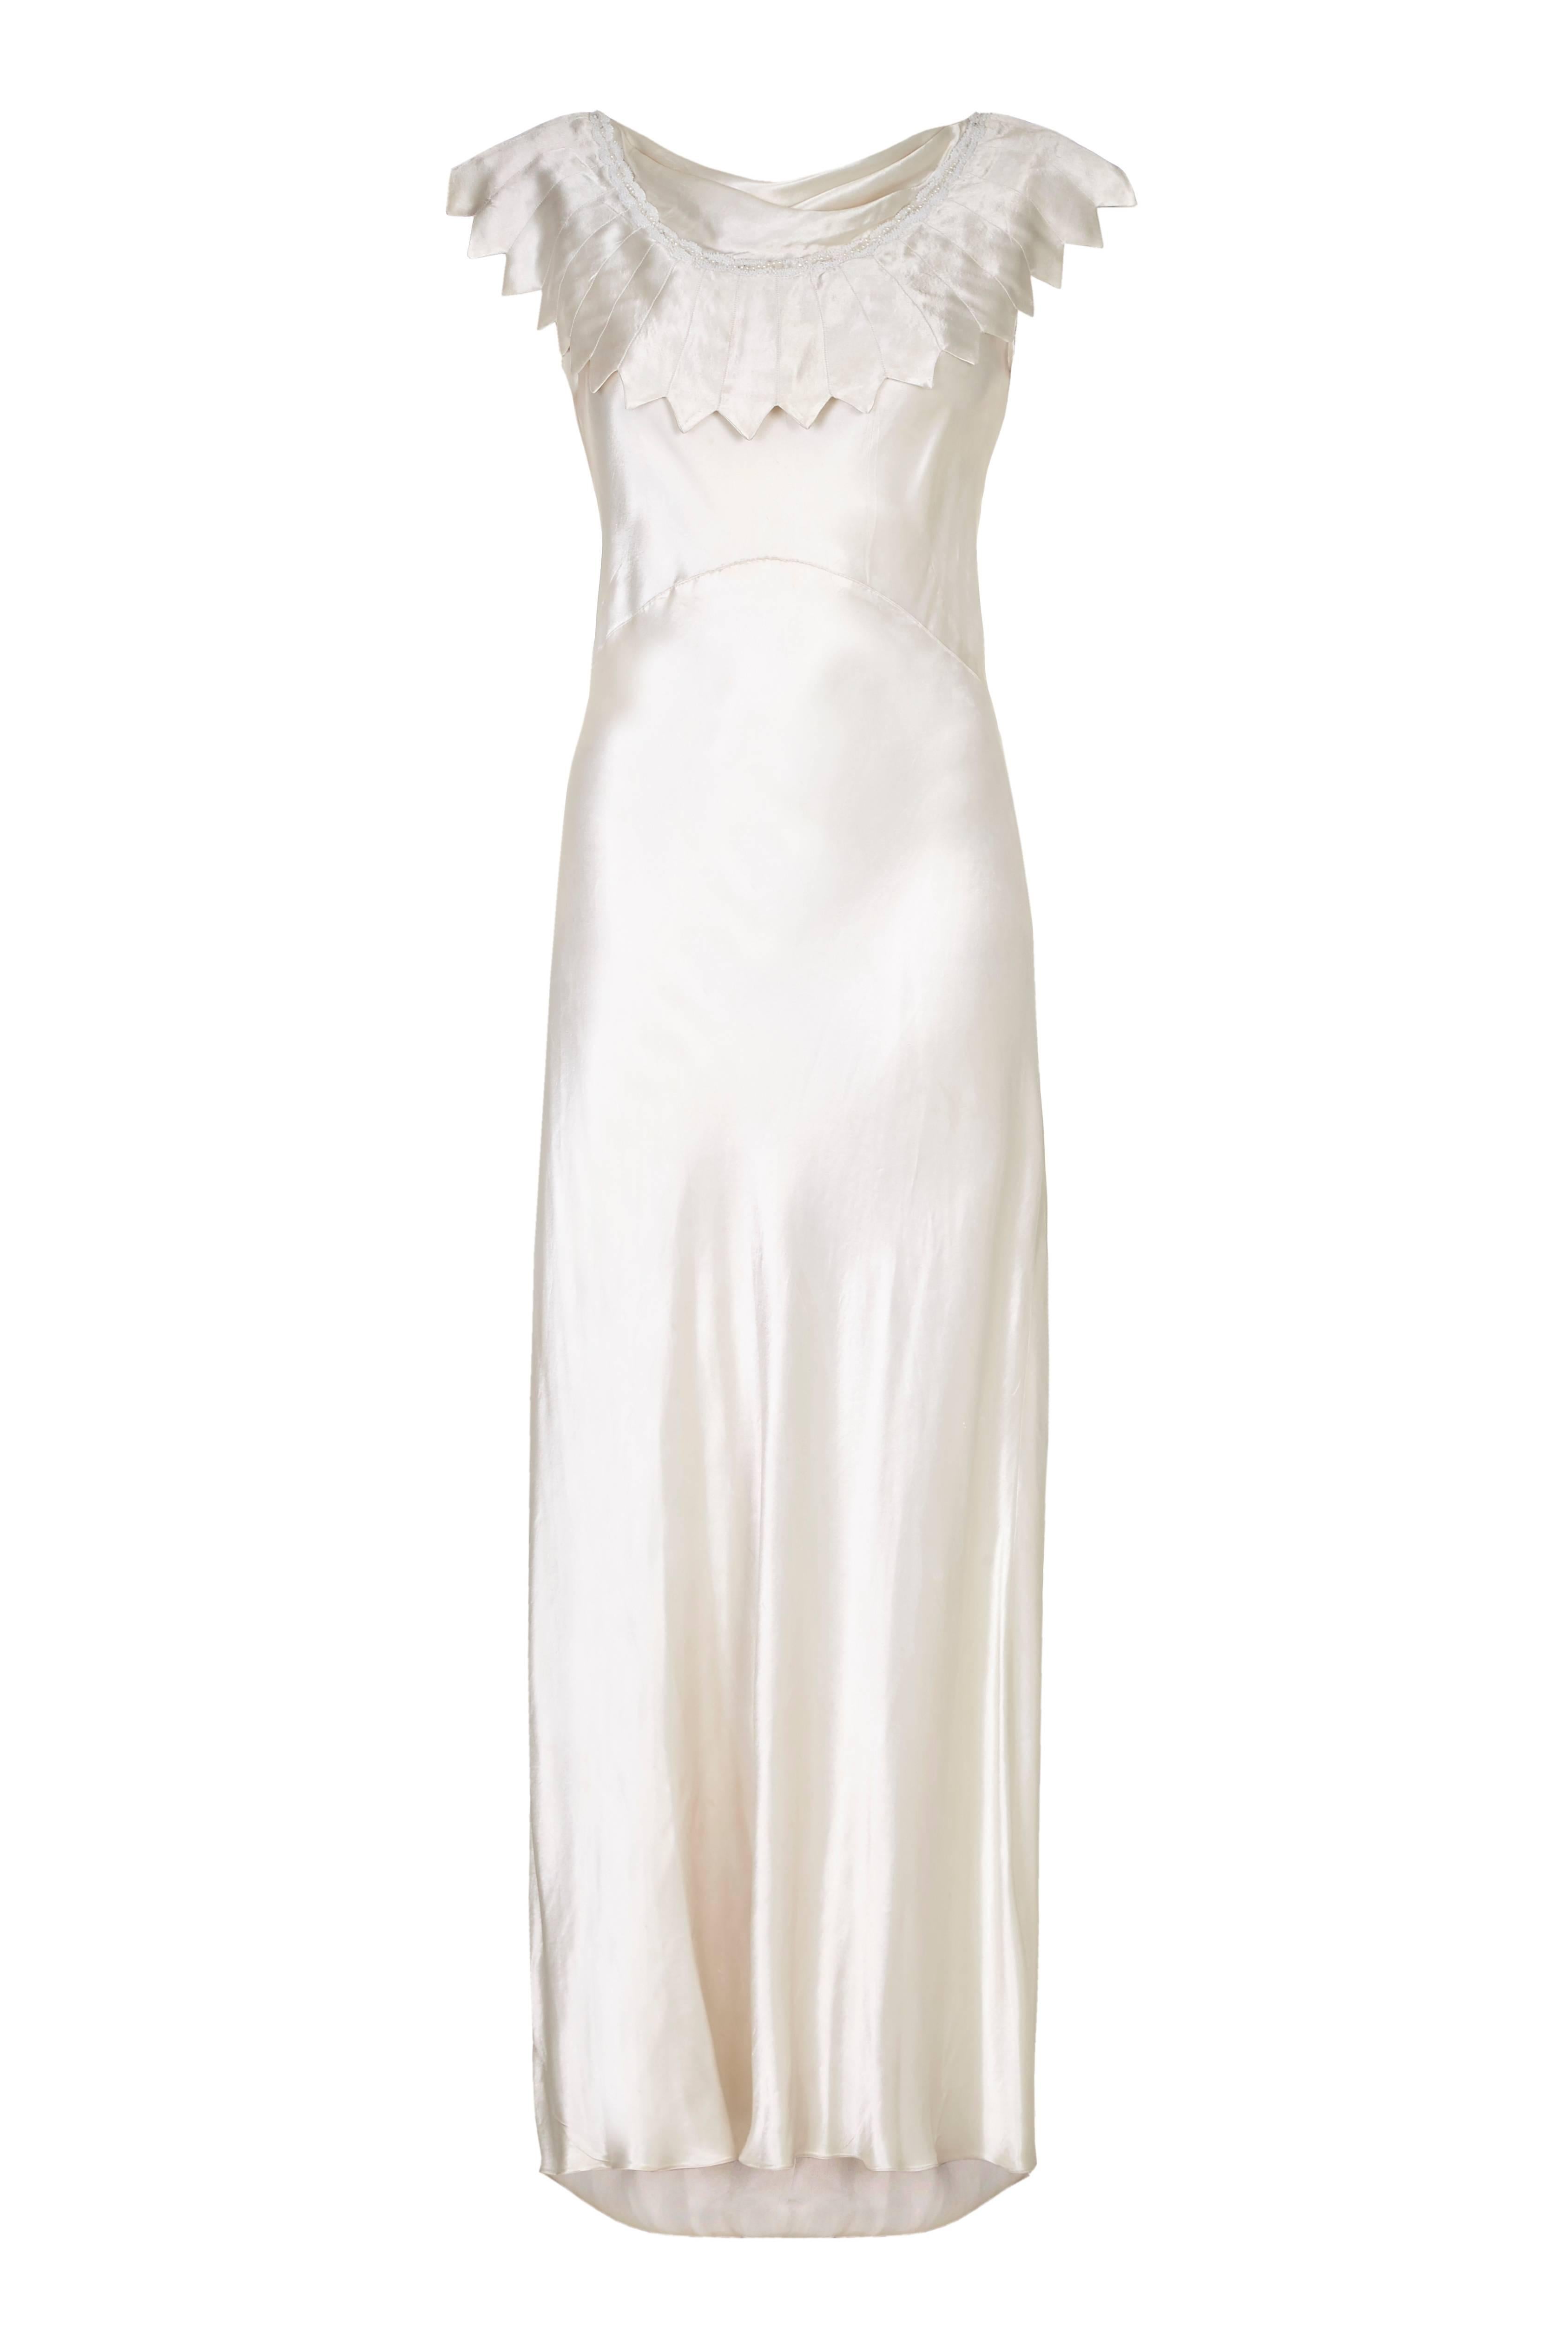 Amazing vintage 1930s bias cut ivory silk satin wedding dress with fabulous decorative collar around the front and scooping down to follow the shape of the low back.  At the front there is also the addition of small cowl neck and some dainty white